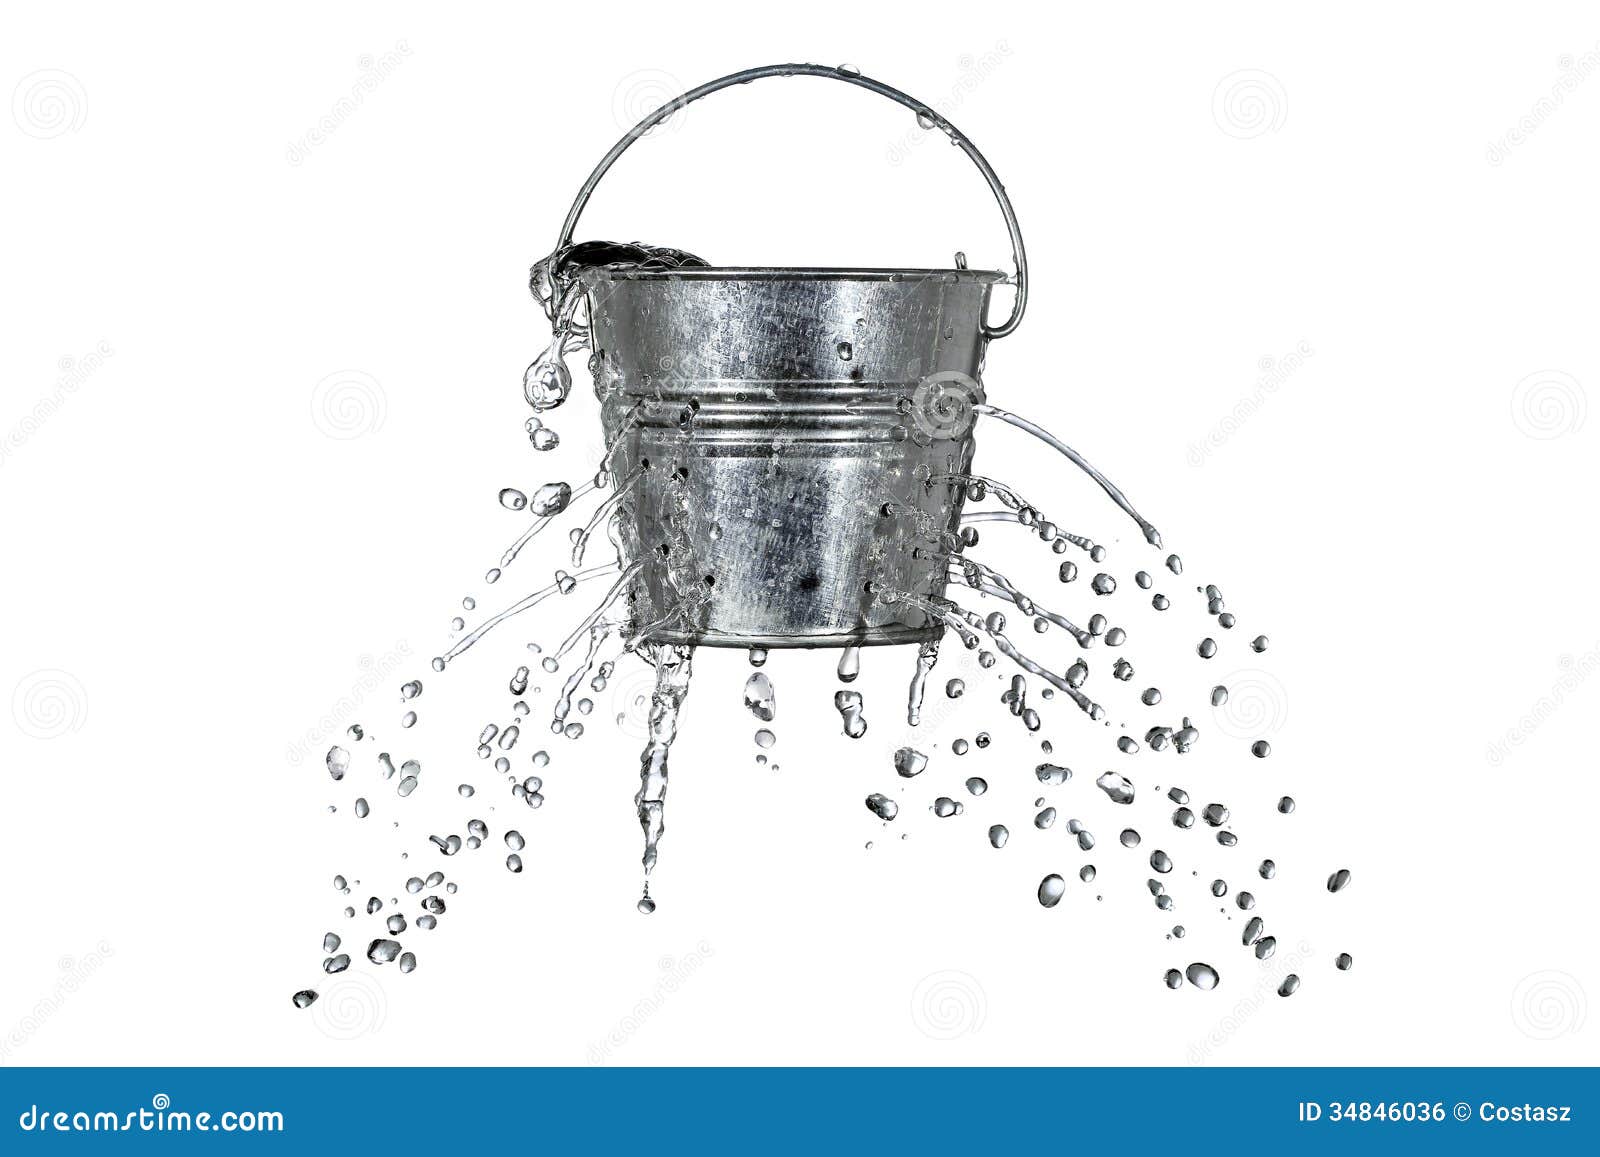 Bucket With Holes Royalty Free Stock Image  Image: 34846036